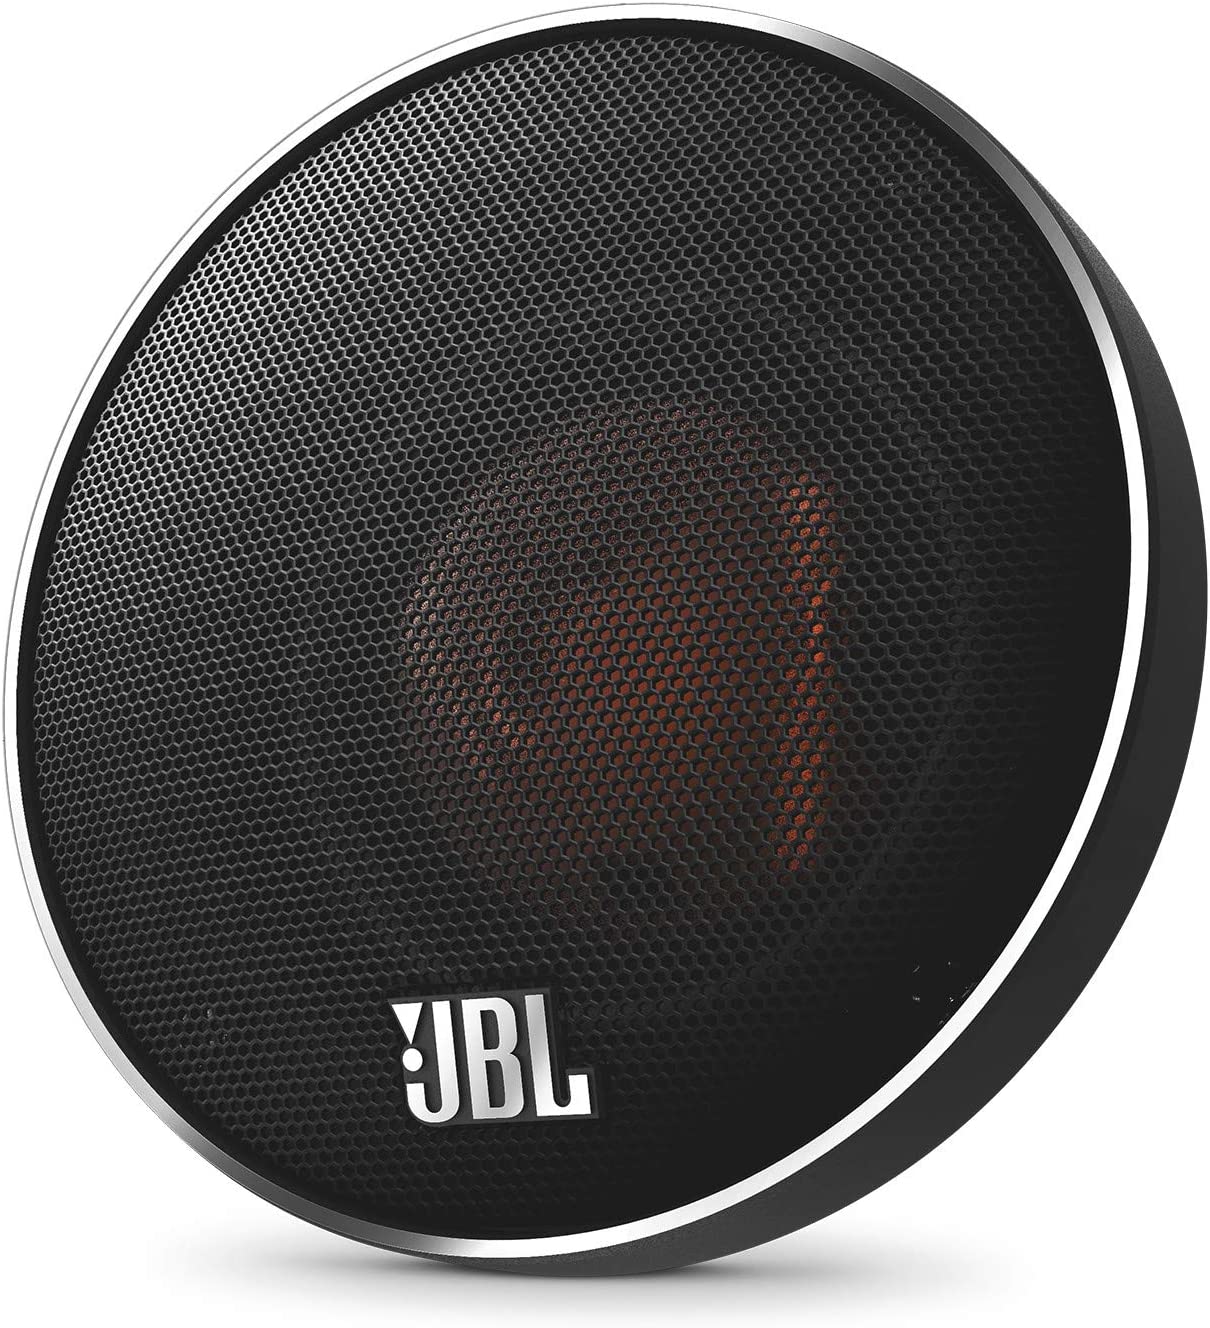 JBL Stadium GTO20M 2" High-Performance Multi-Element Speakers and Component Systems